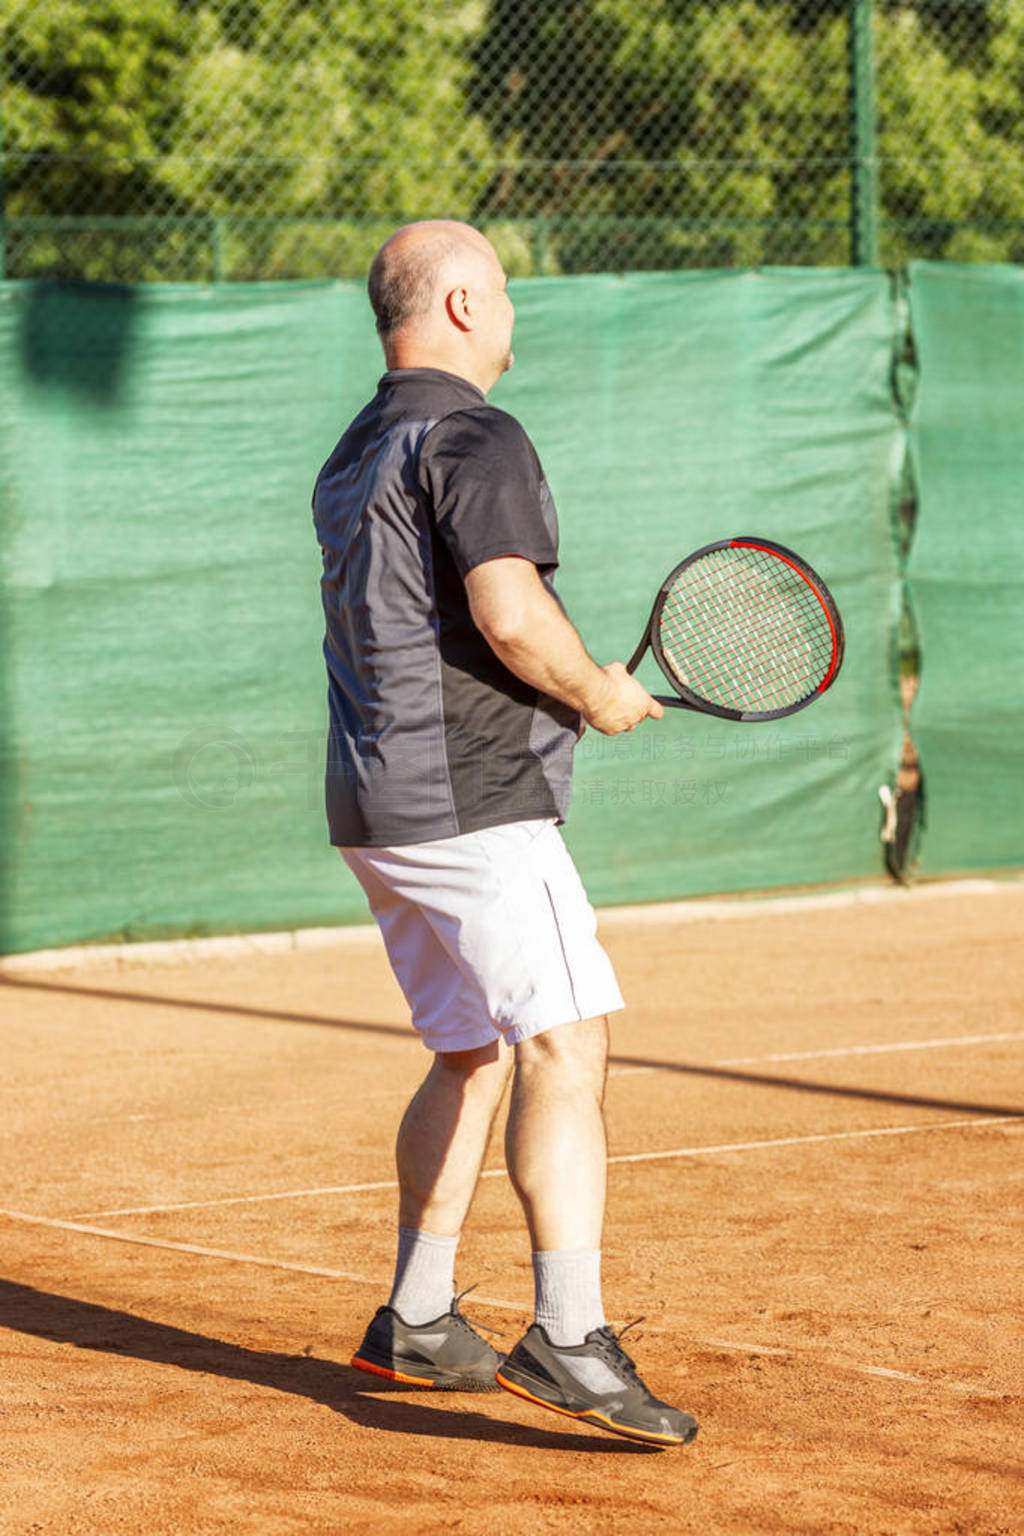 Adult bald man plays tennis on the court. Sunny day.